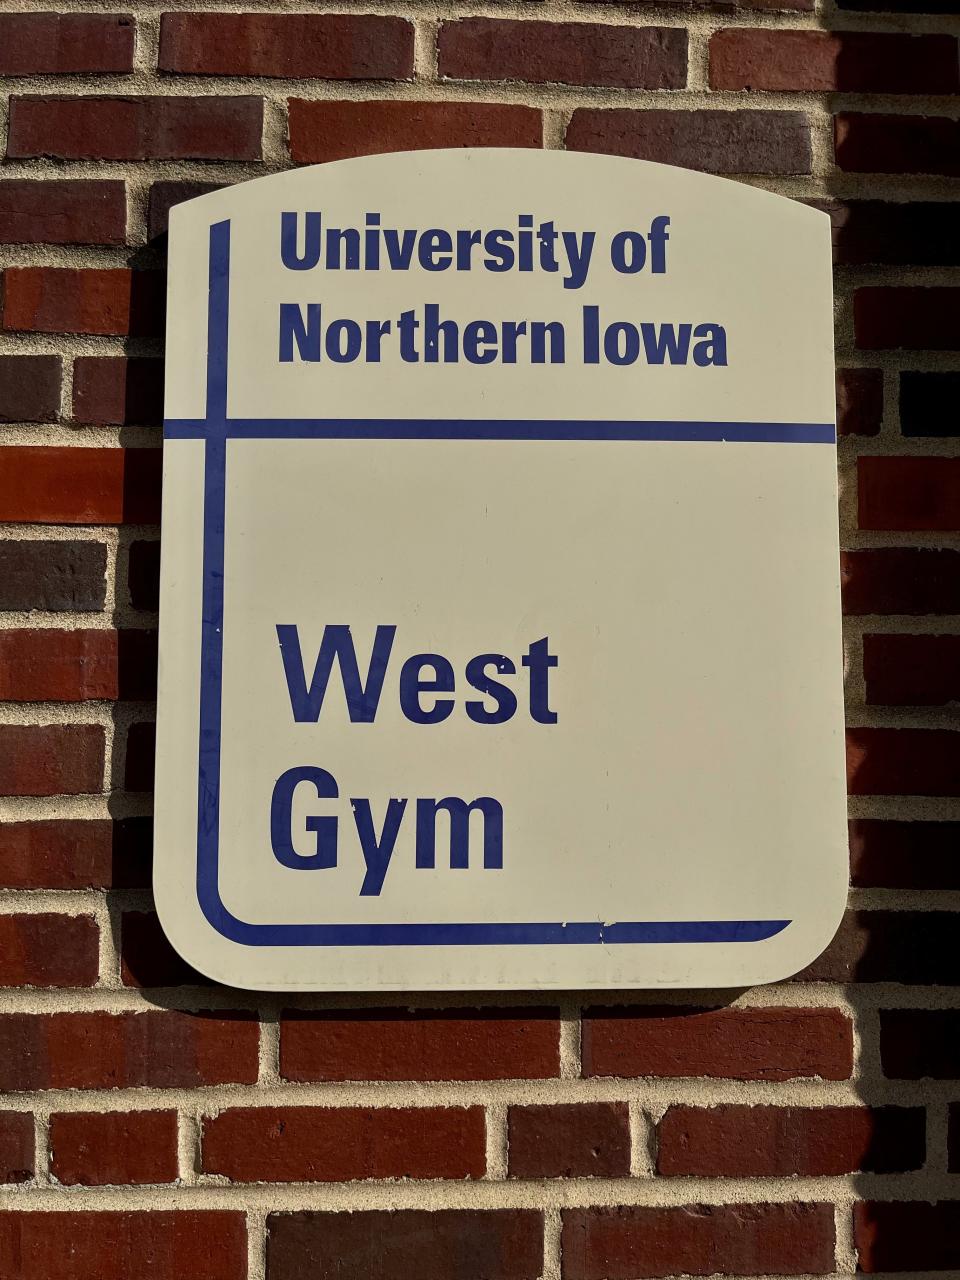 The historic West Gym at the University of Northern Iowa.